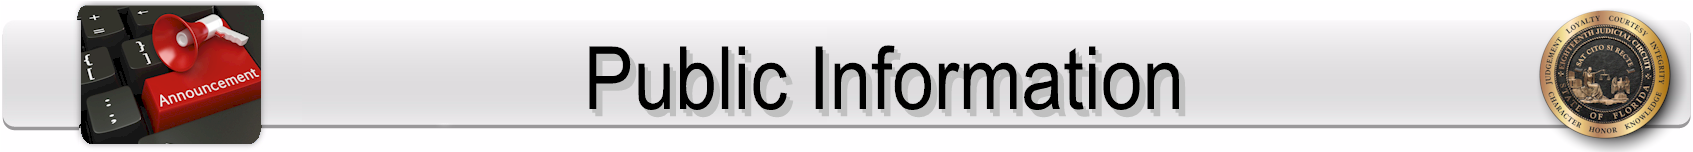 Public Information Page Banner